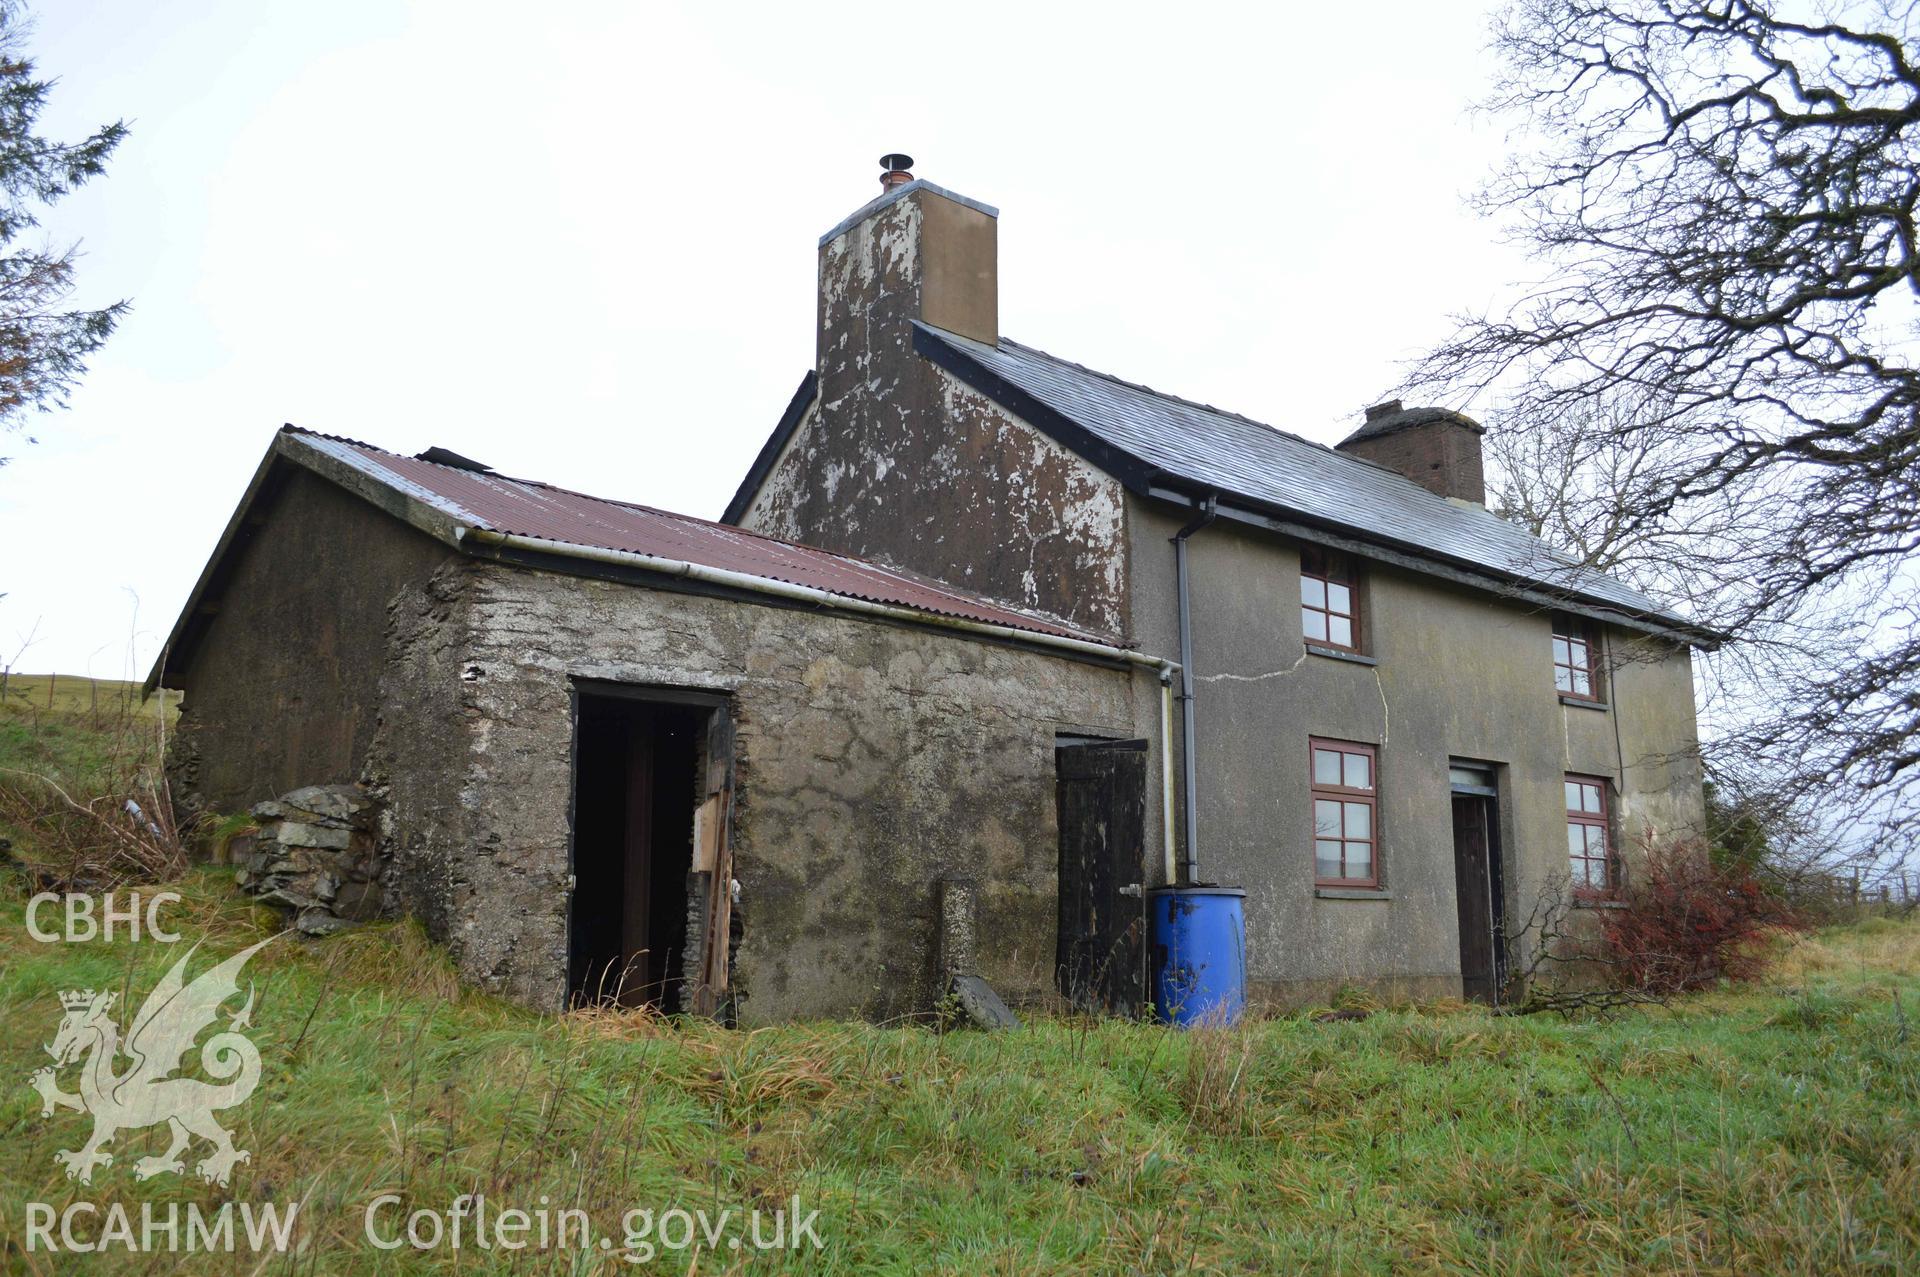 Digital colour photograph showing exterior of Bryn Eglwys - part of CPAT Project 2498: Building Survey for Bryn Eglwys, Dylife ( The south-eastern elevation and byre), dated 2020.